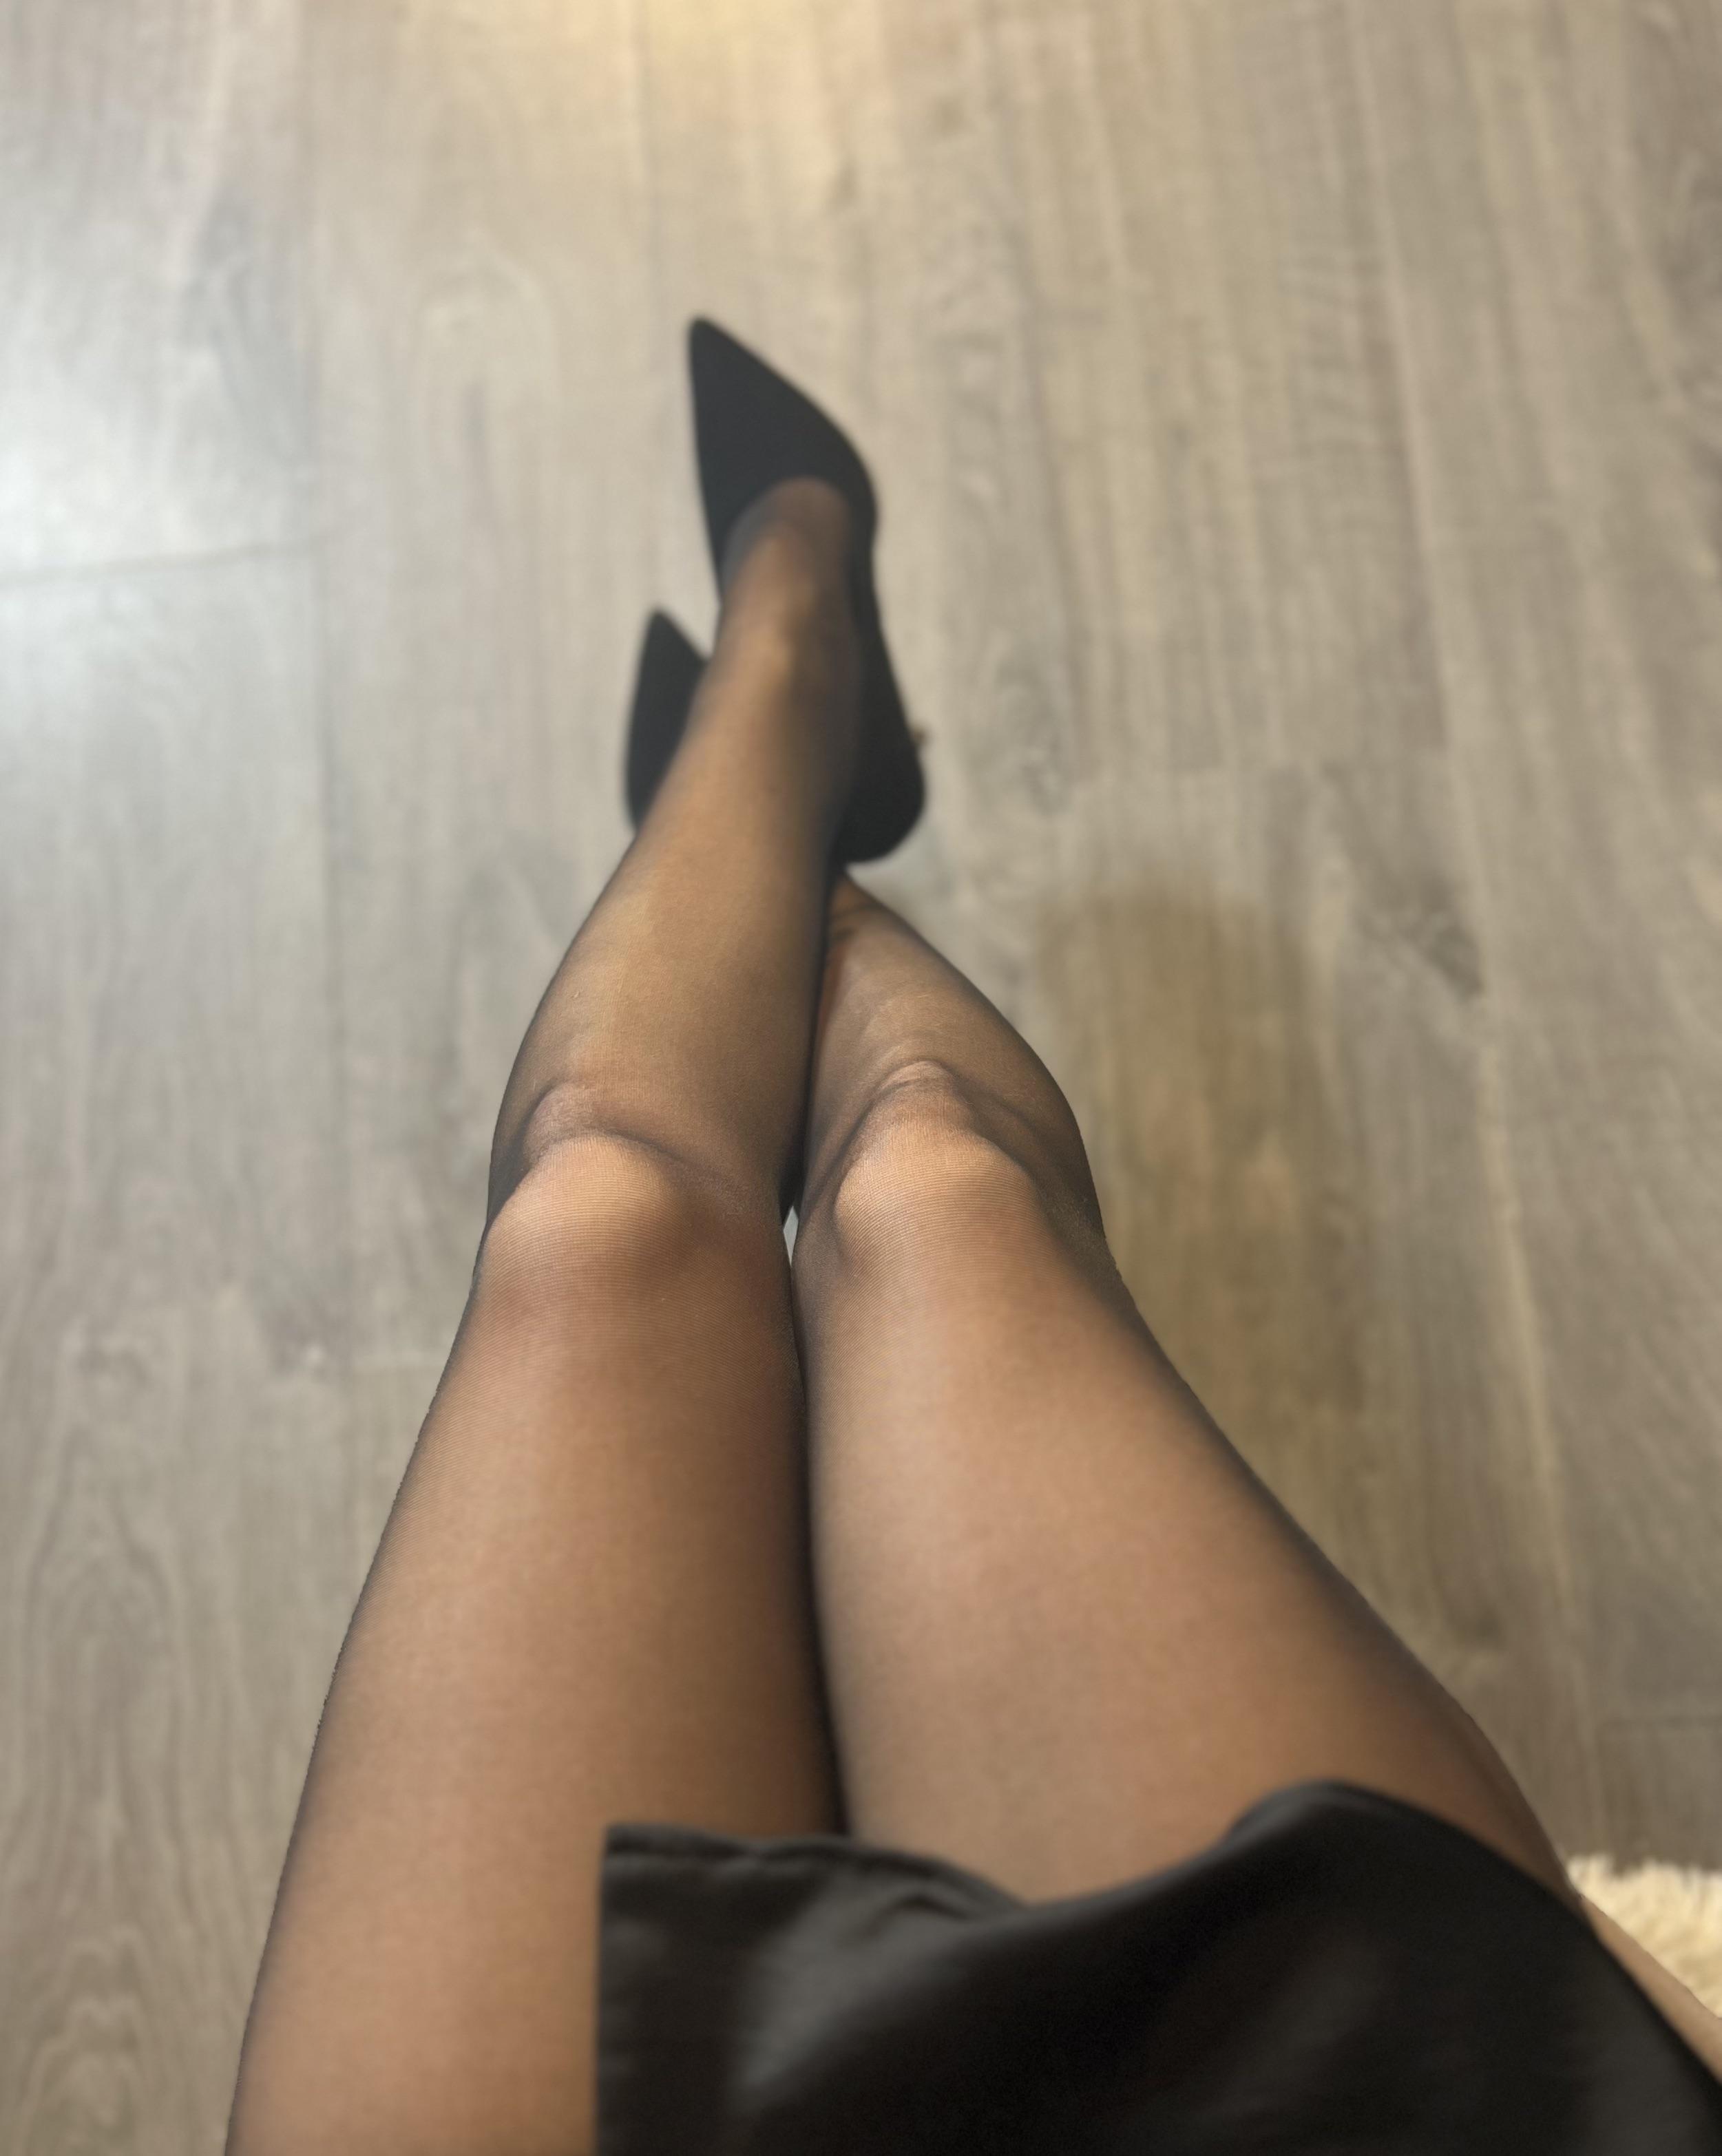 I think every girl should wear pantyhose because theyre just that sexy image image